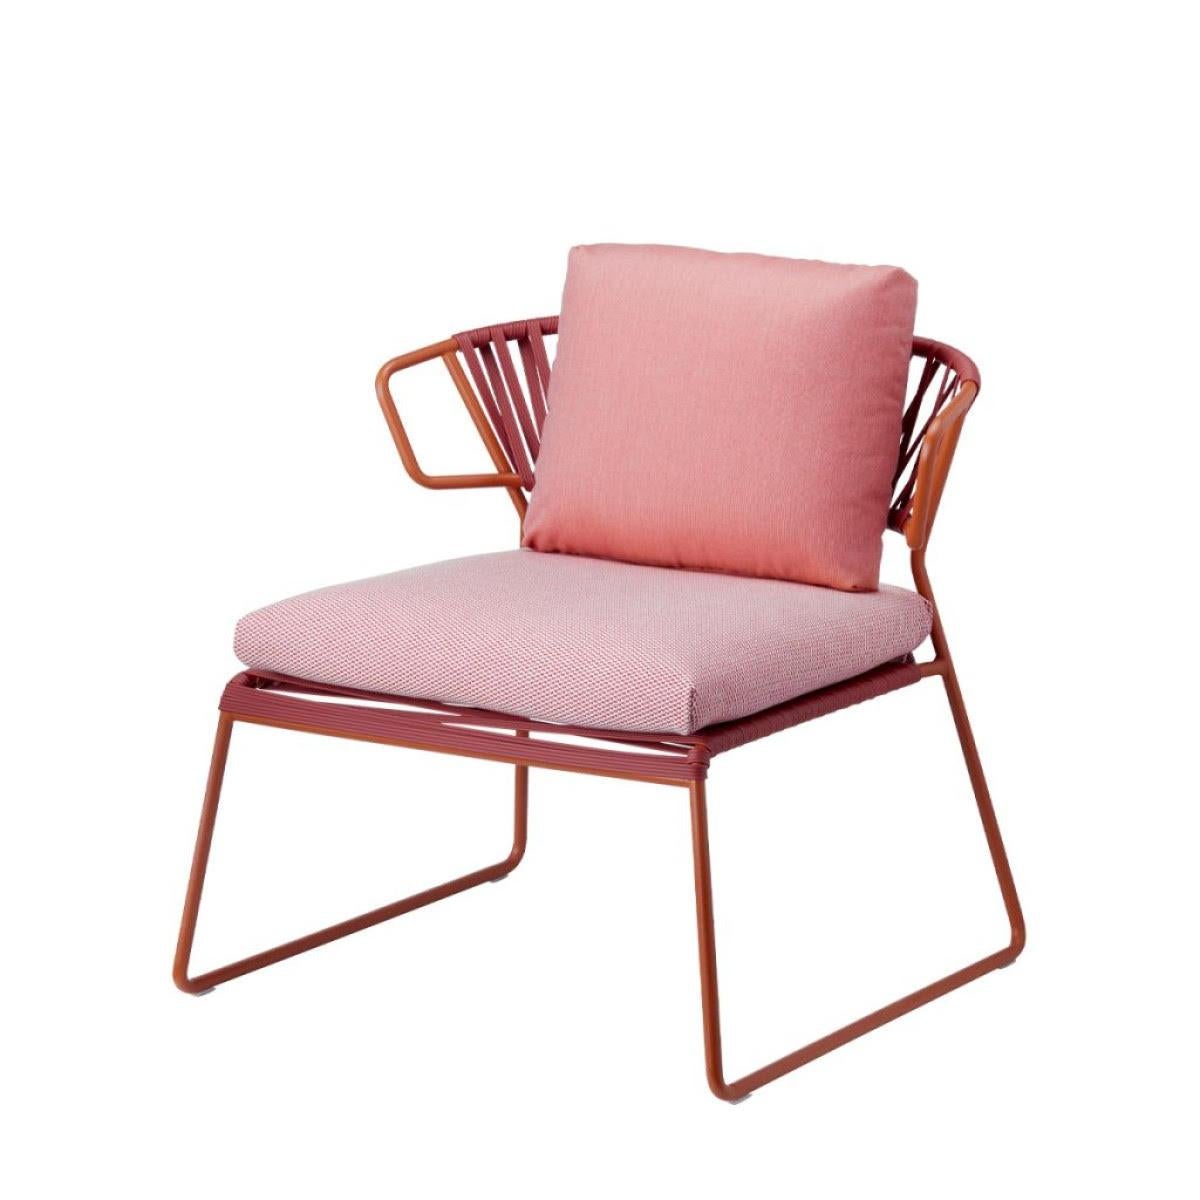 Modern Pink Terracotta Armchair Outdoor or Indoor in Metal and Ropes, 21 century
Modern production armchair for outdoor or indoor use. The frame is made of metal and reinforced with ropes on the back and seat. This armchair has an innovative, modern